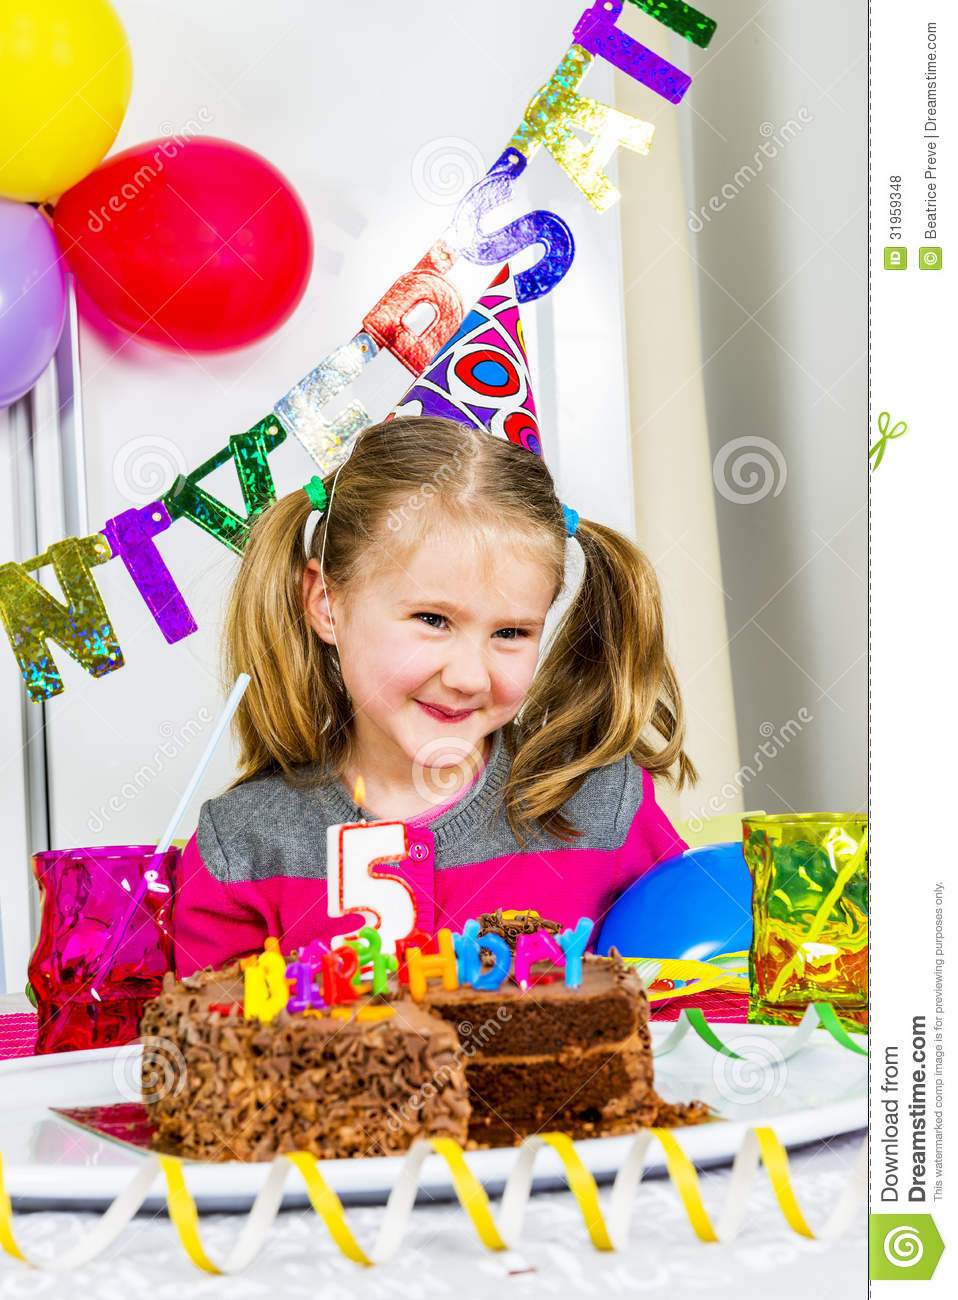 Birthday Party Funny
 Big funny birthday party stock photo Image of home